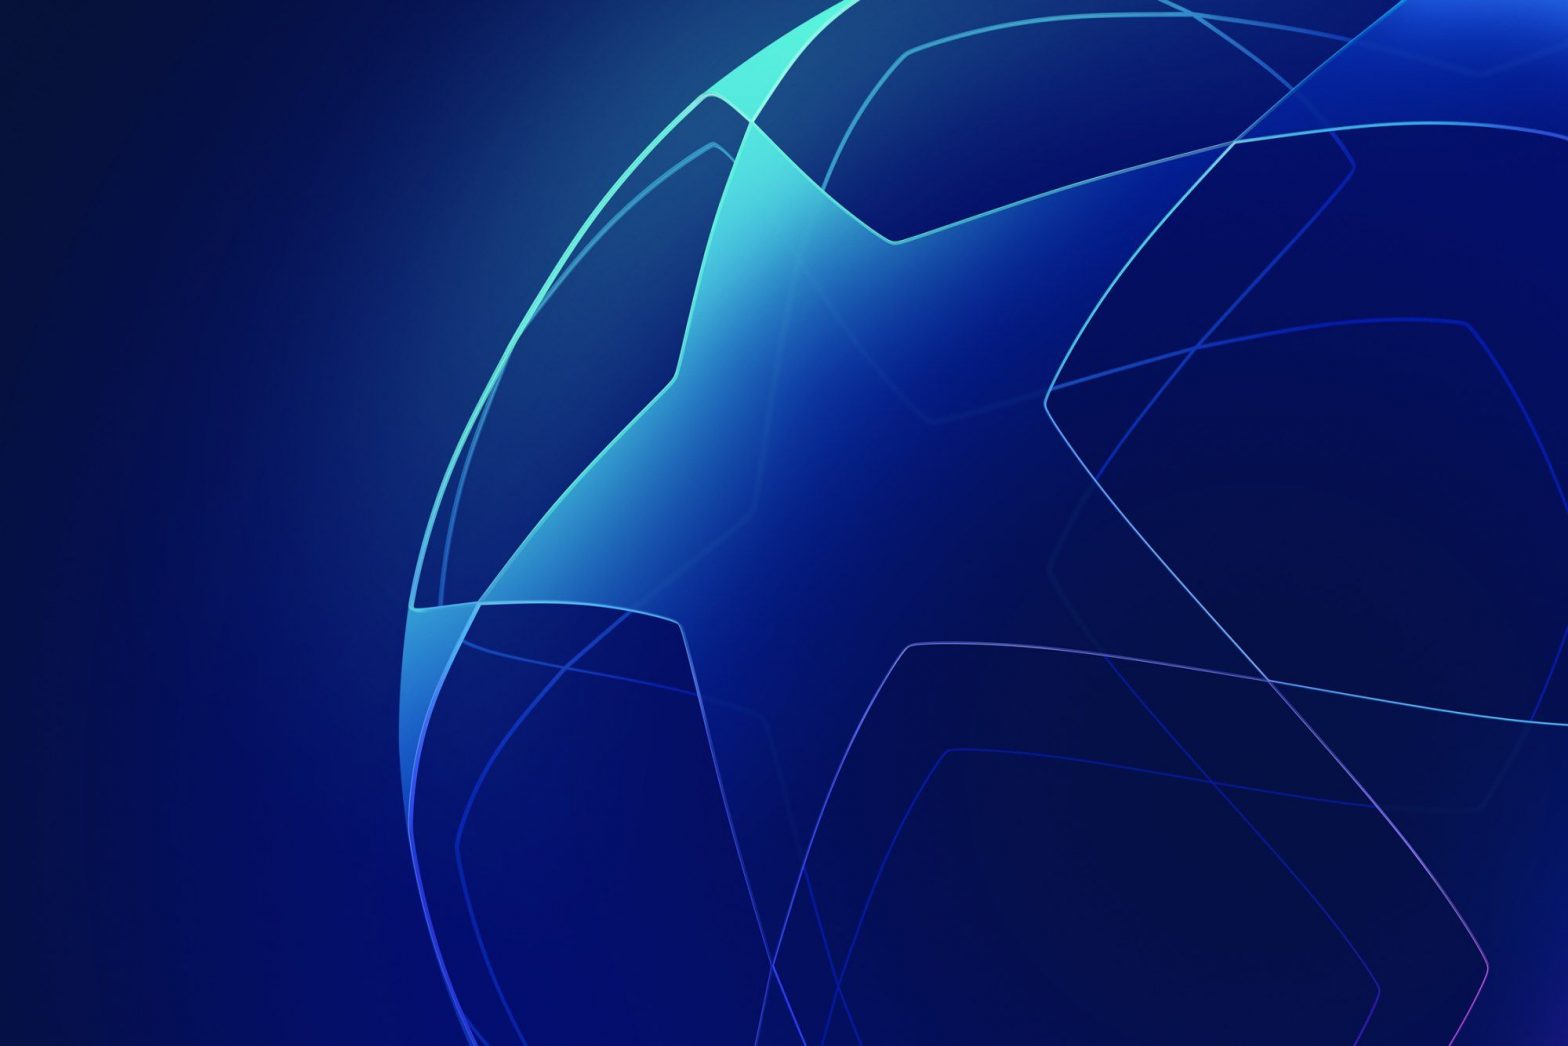 Champions League – Introducing the competition